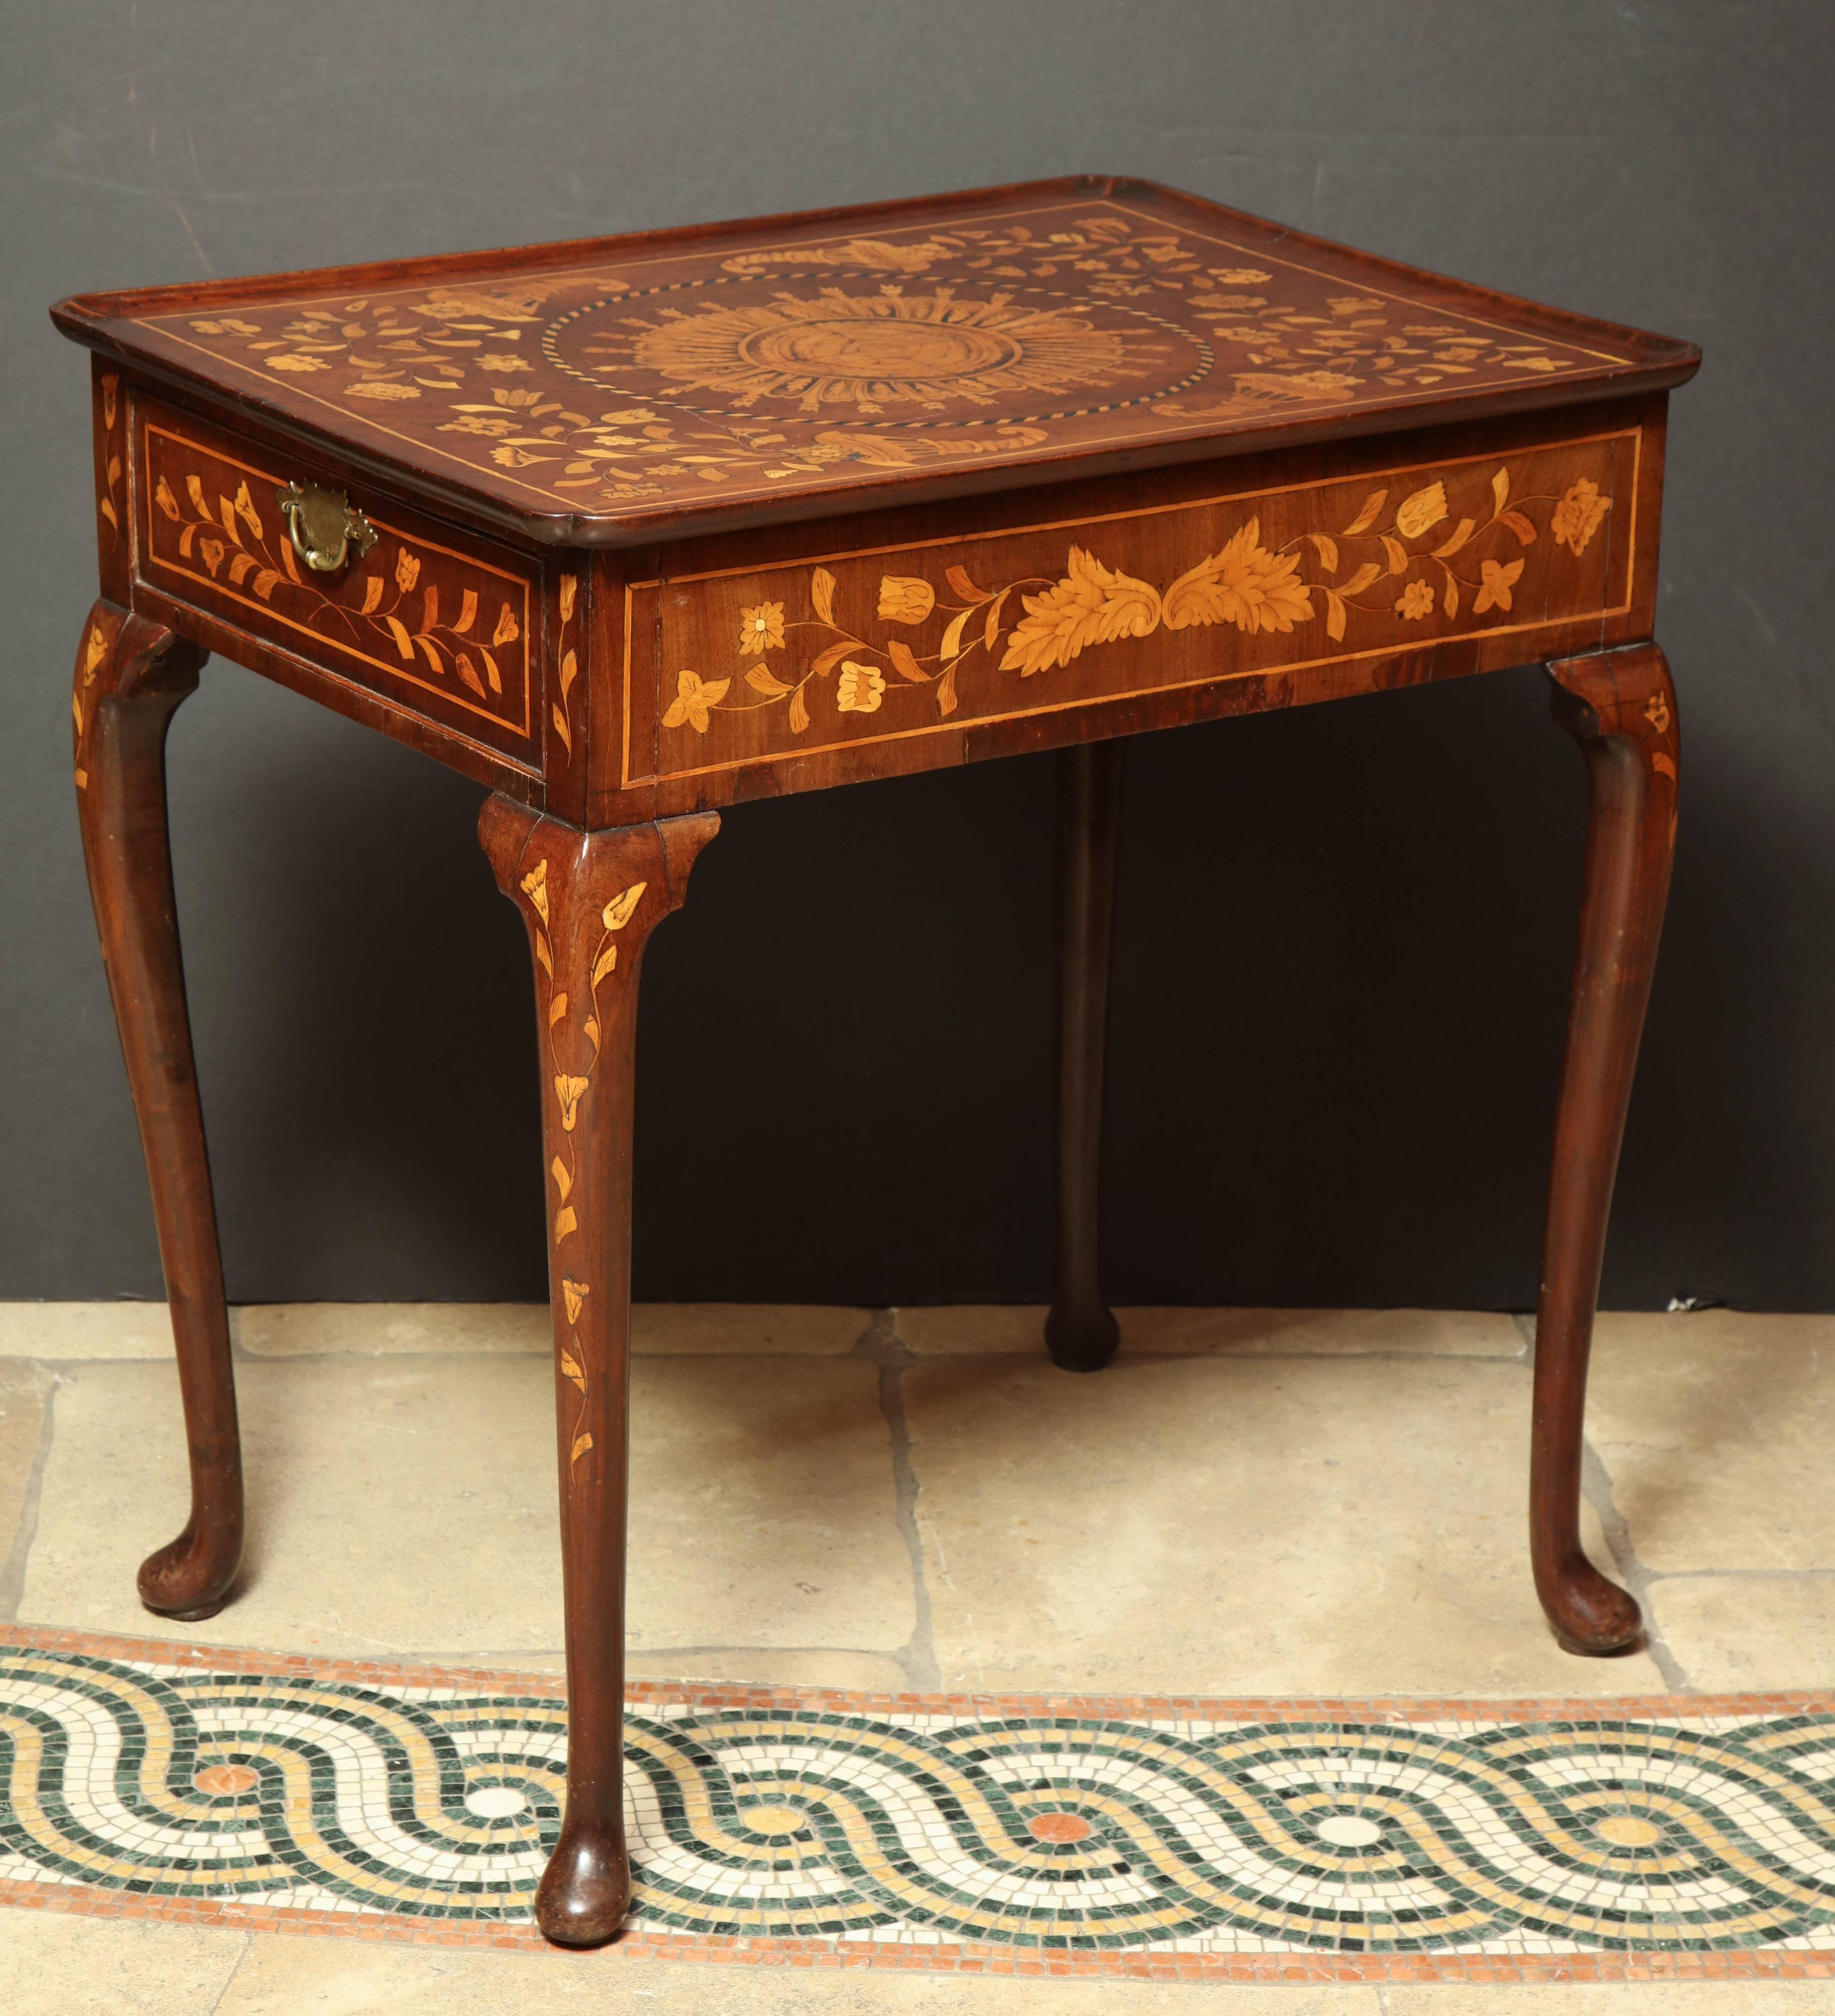 A fine Dutch elaborately inlaid walnut tea table with a carved dish top, single drawer, cabriole legs and pad feet.